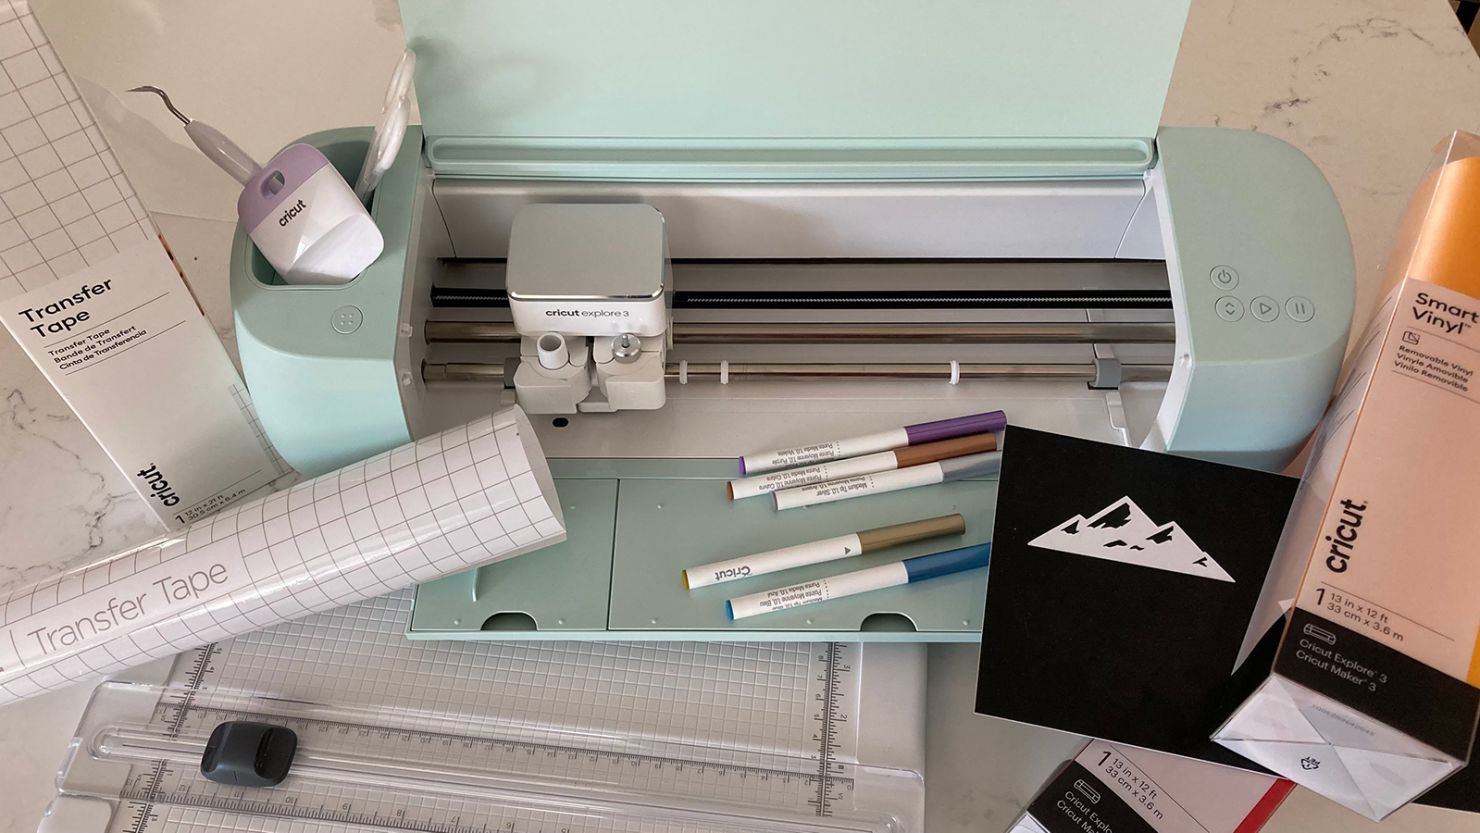 The Cricut Machine Tool Organizer - Product Review